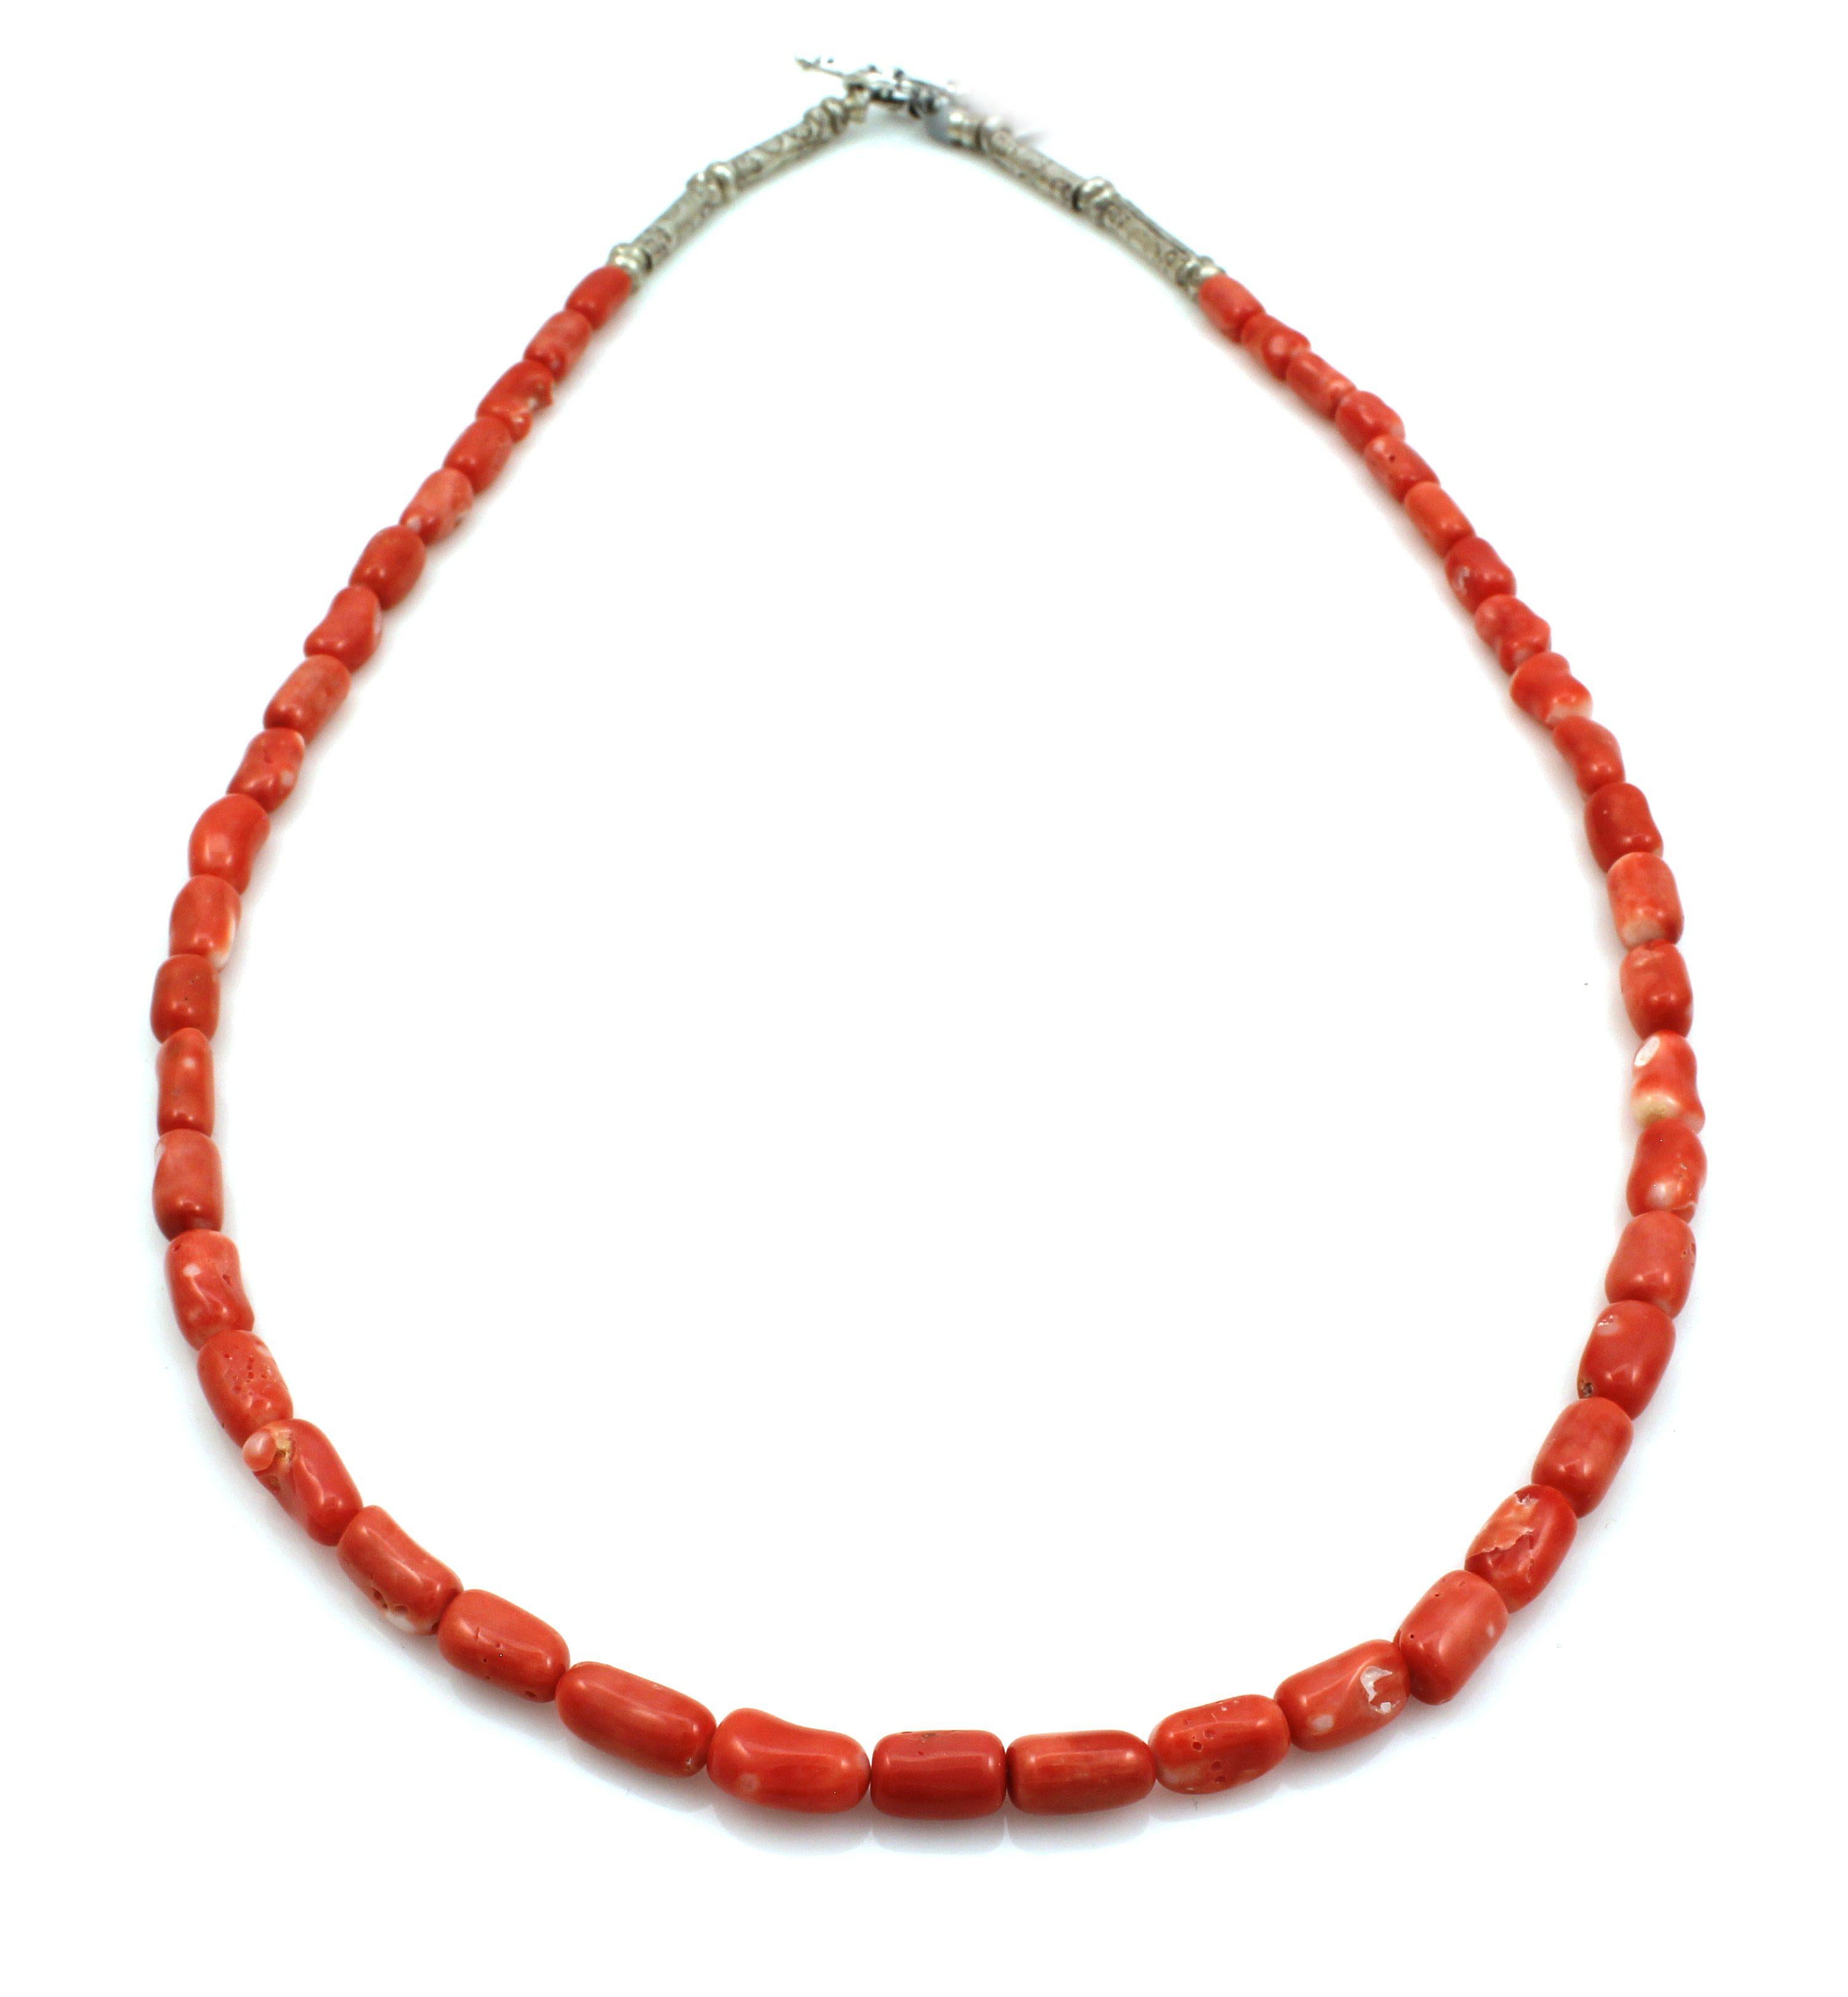 Sold at Auction: Vintage single strand large red coral necklace with a 14K.  yellow gold closure.